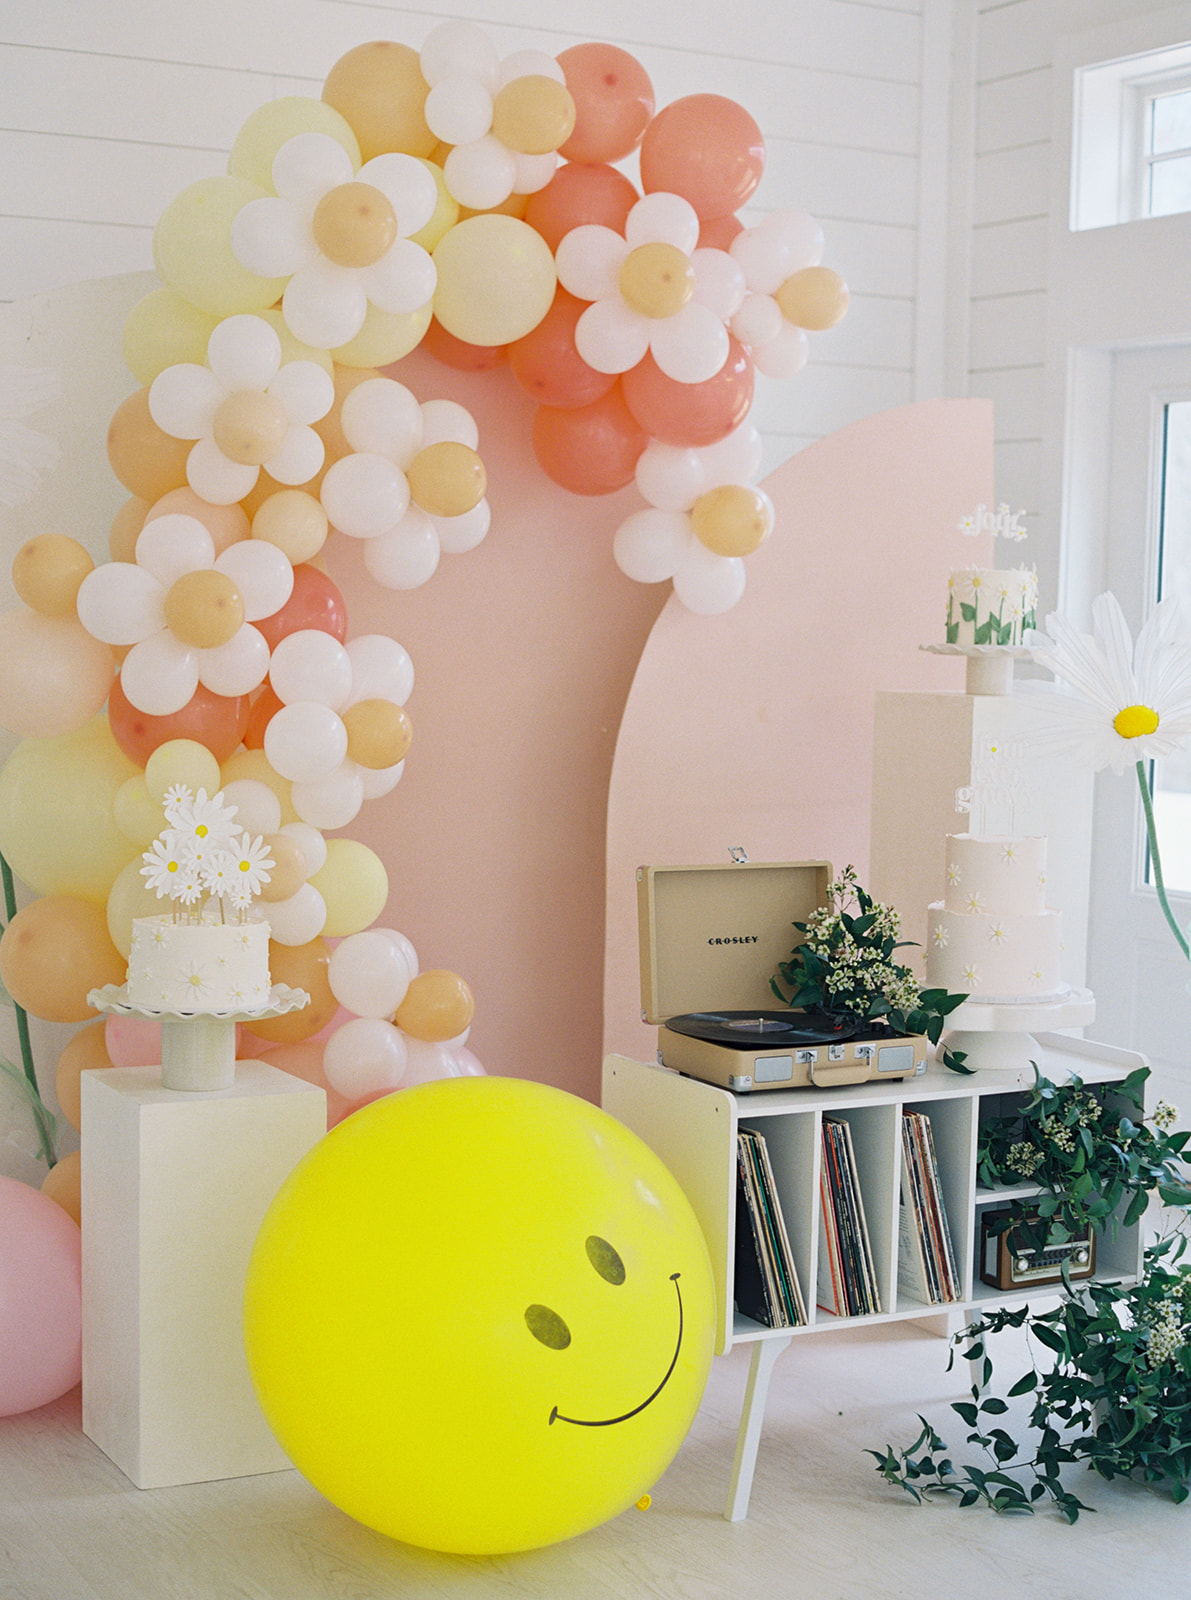 daisy balloon arch and smiley face balloons for 4th birthday party